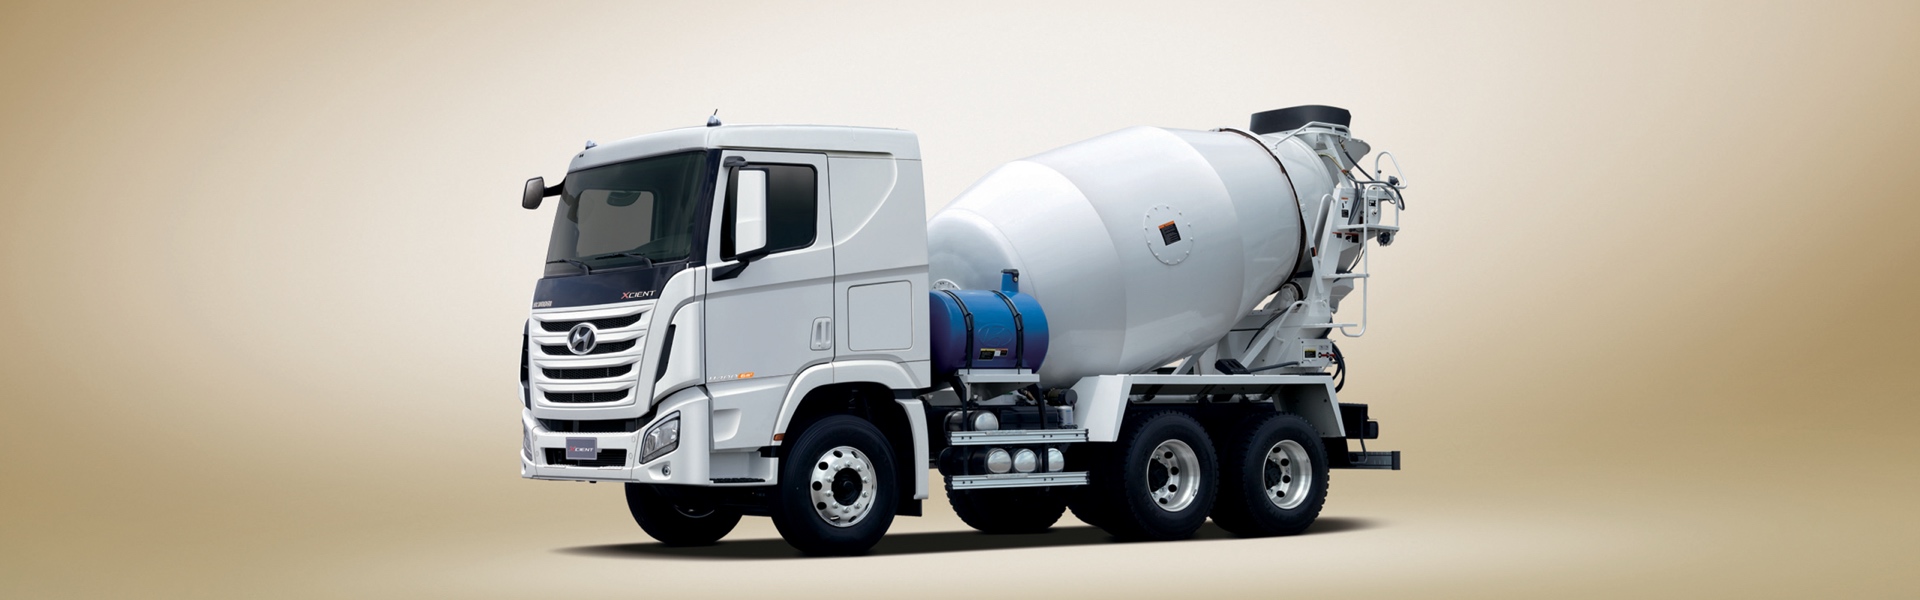 Roles of the Mixer Truck